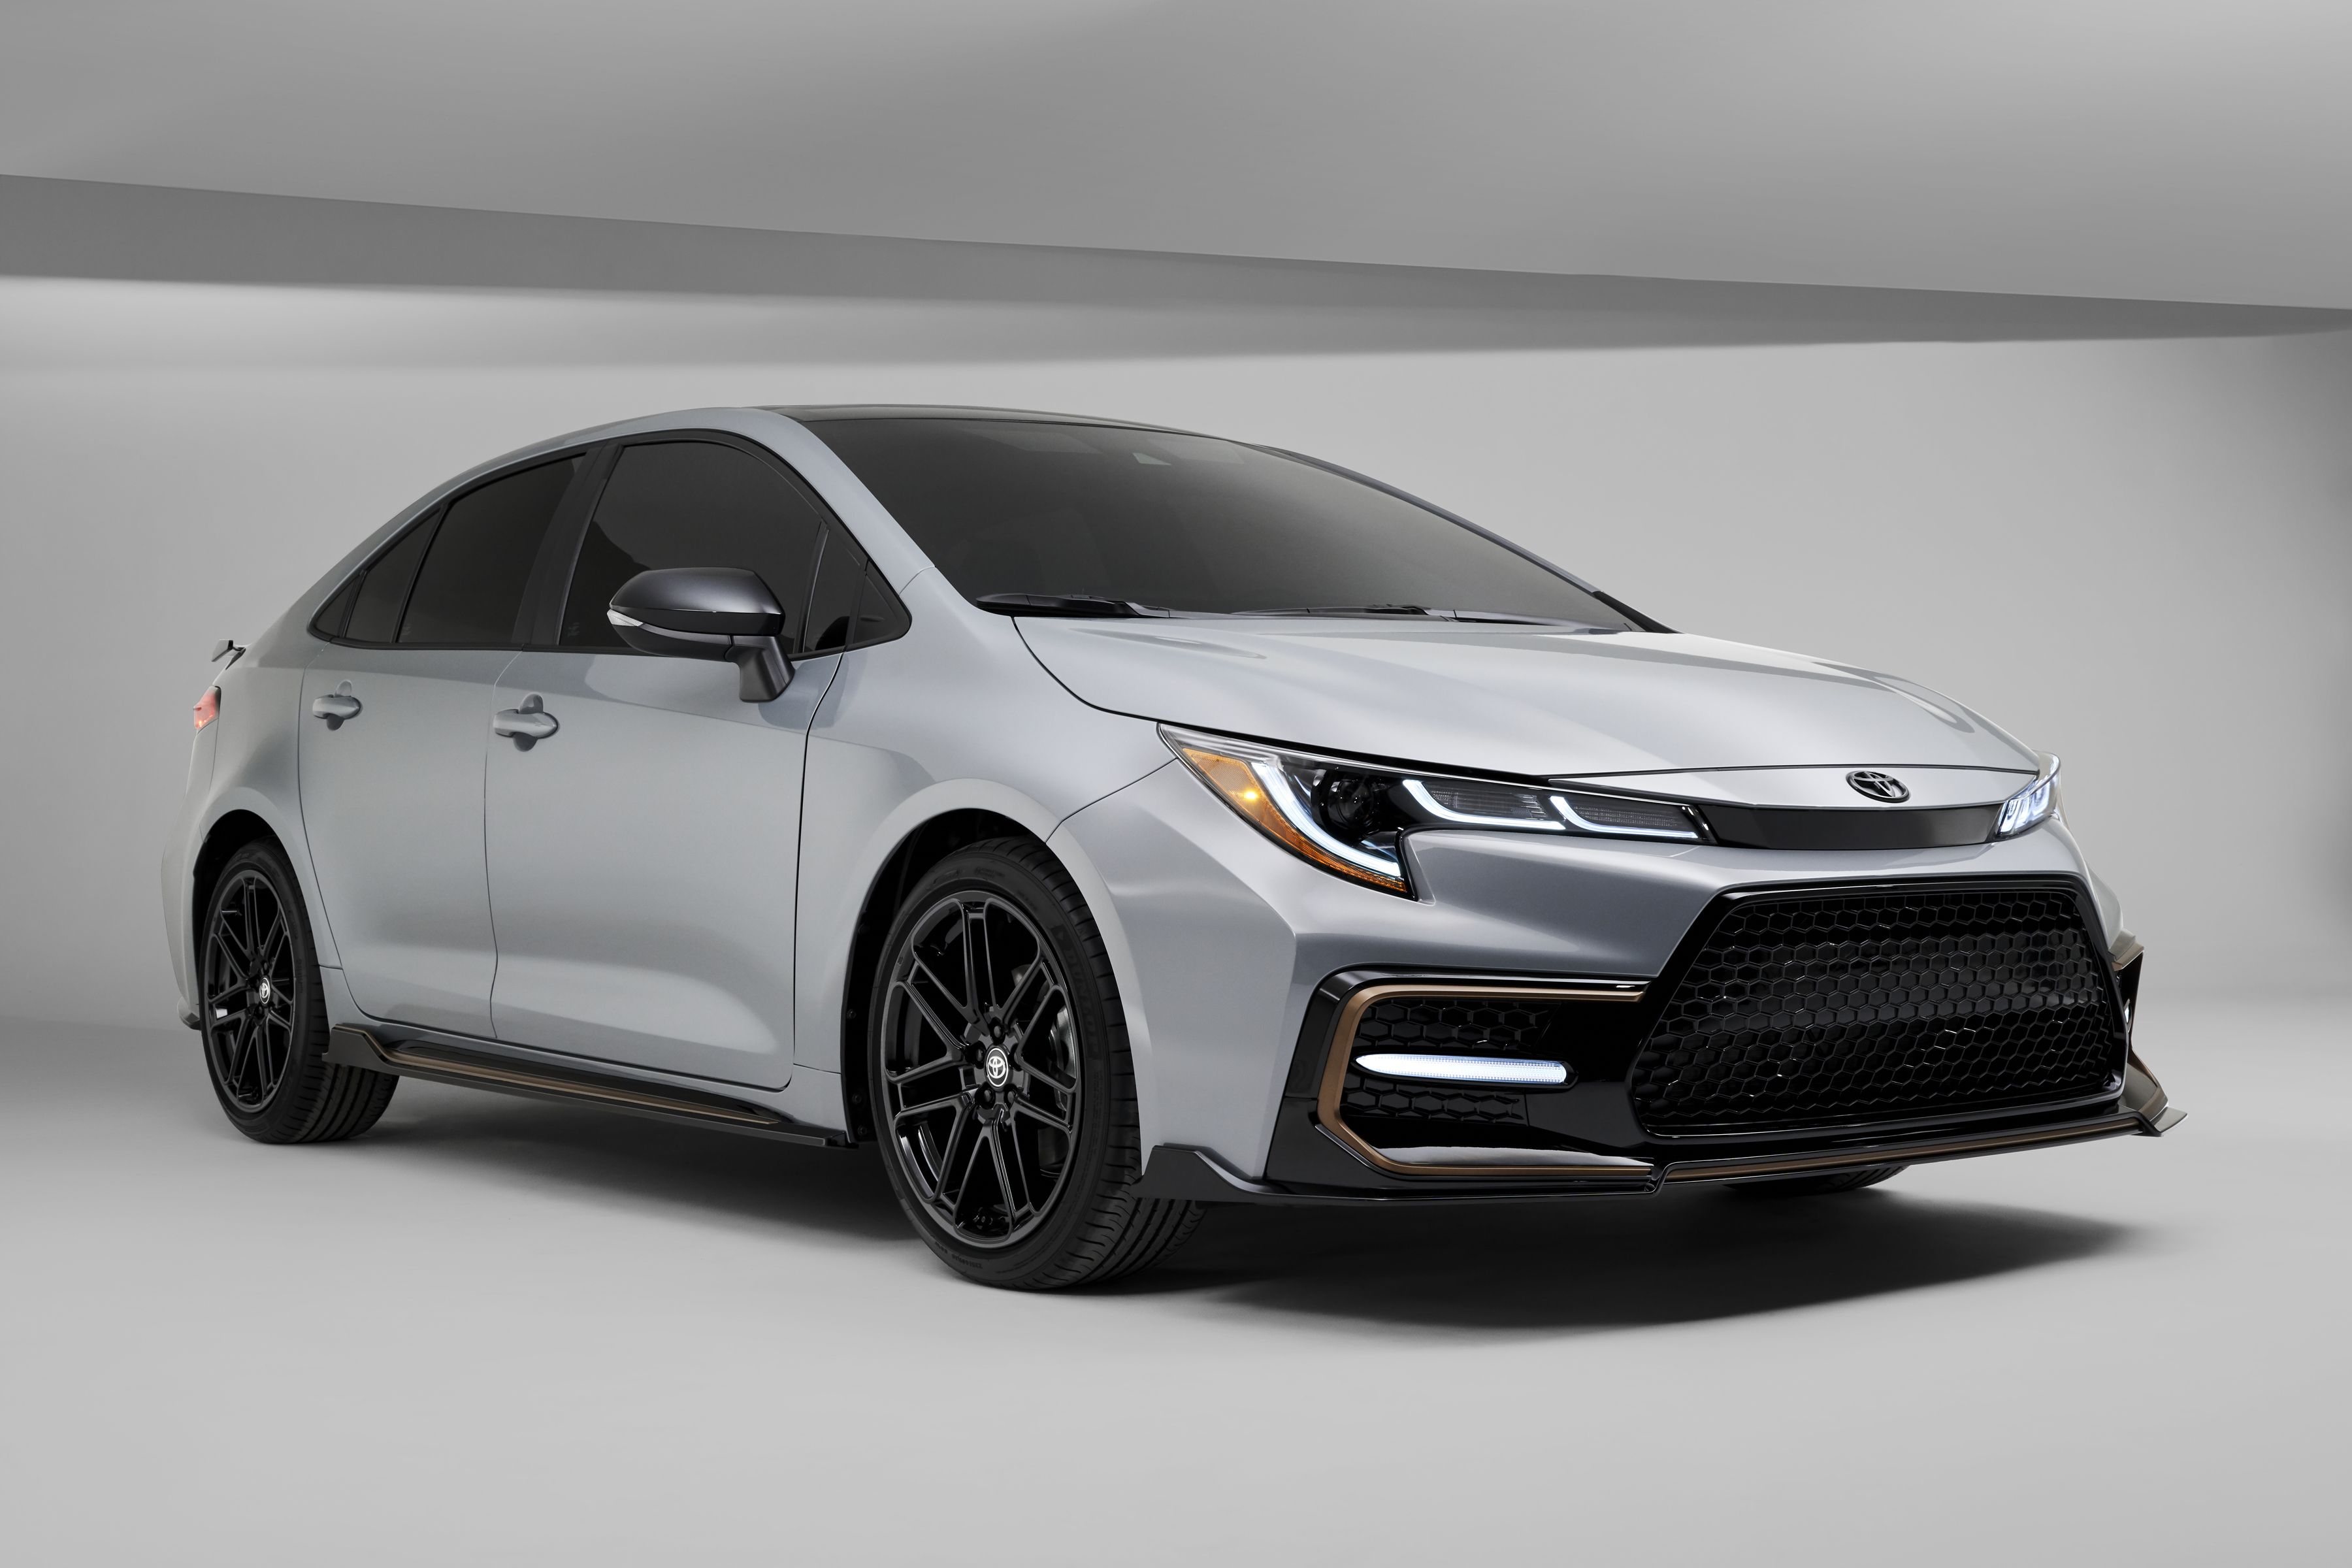 Toyota Corolla Apex Edition Aims for the Curves in Bold Style